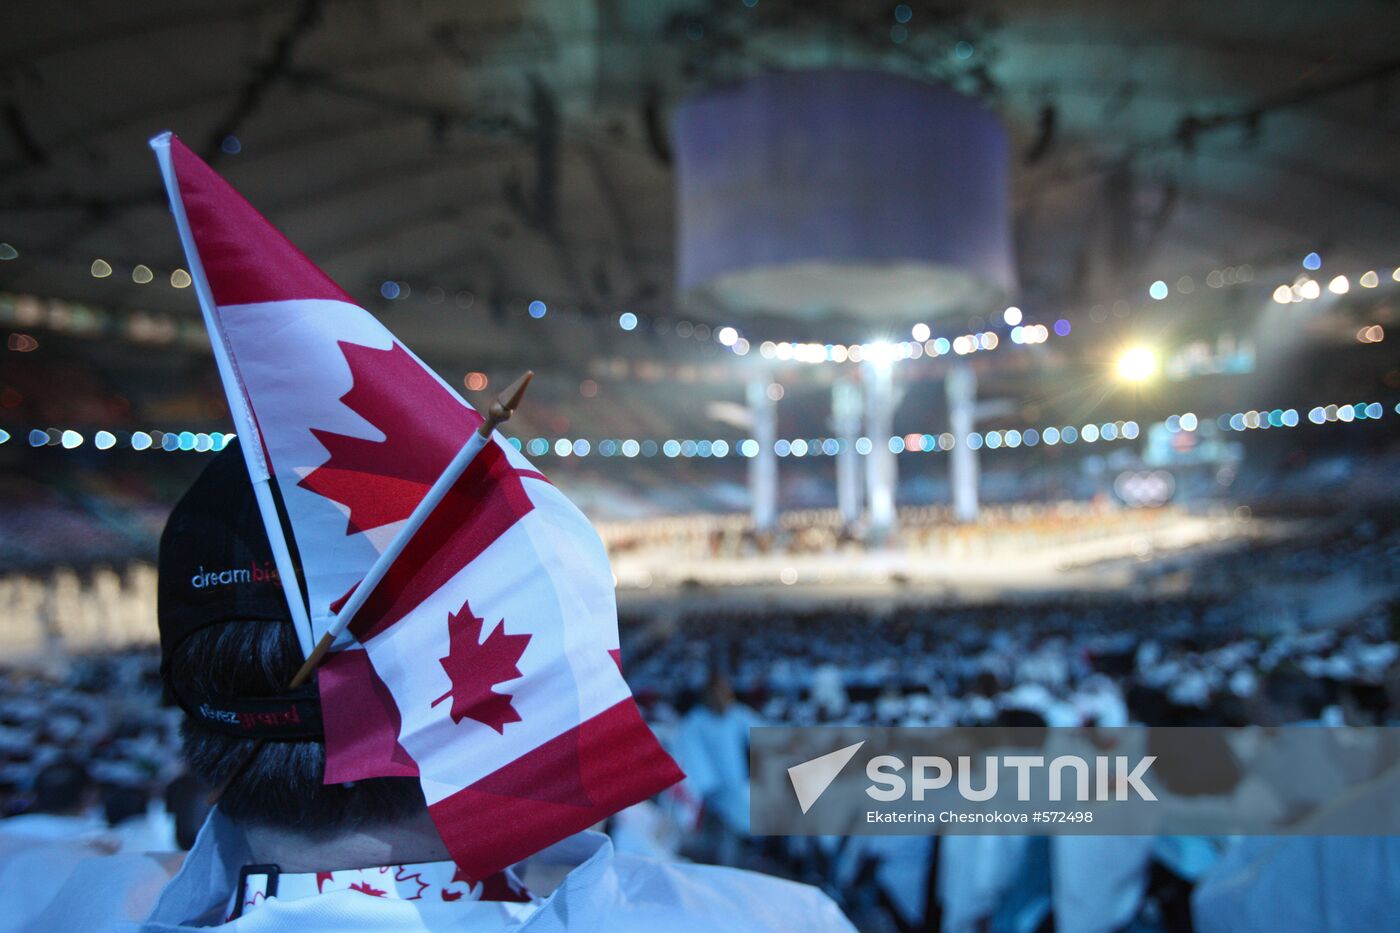 2010 Olympic Winter Games Opening Ceremony